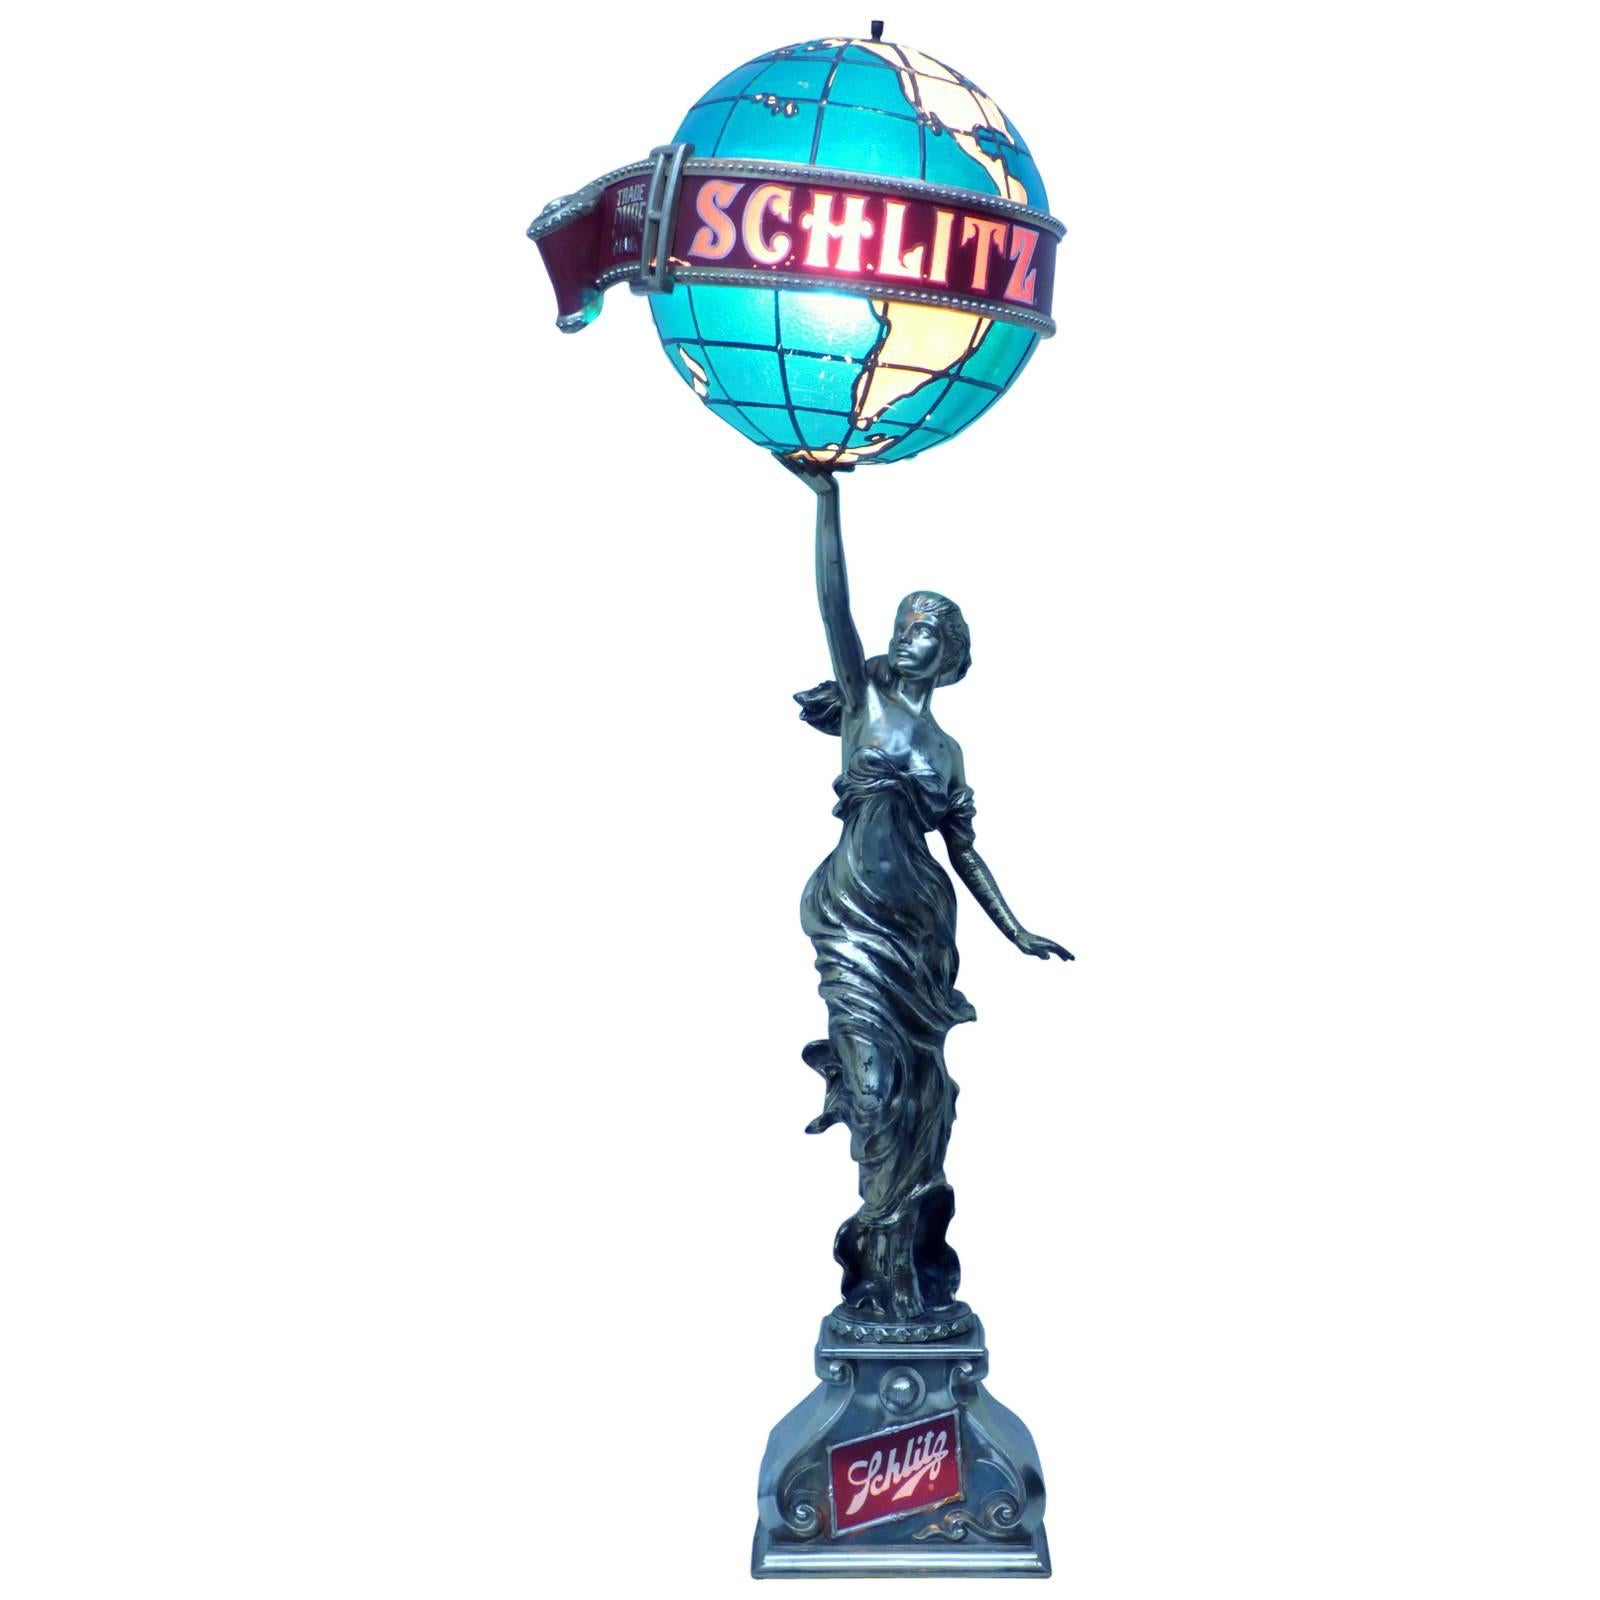 Schlitz Beer Colombian Princess Statue Lamp For Sale